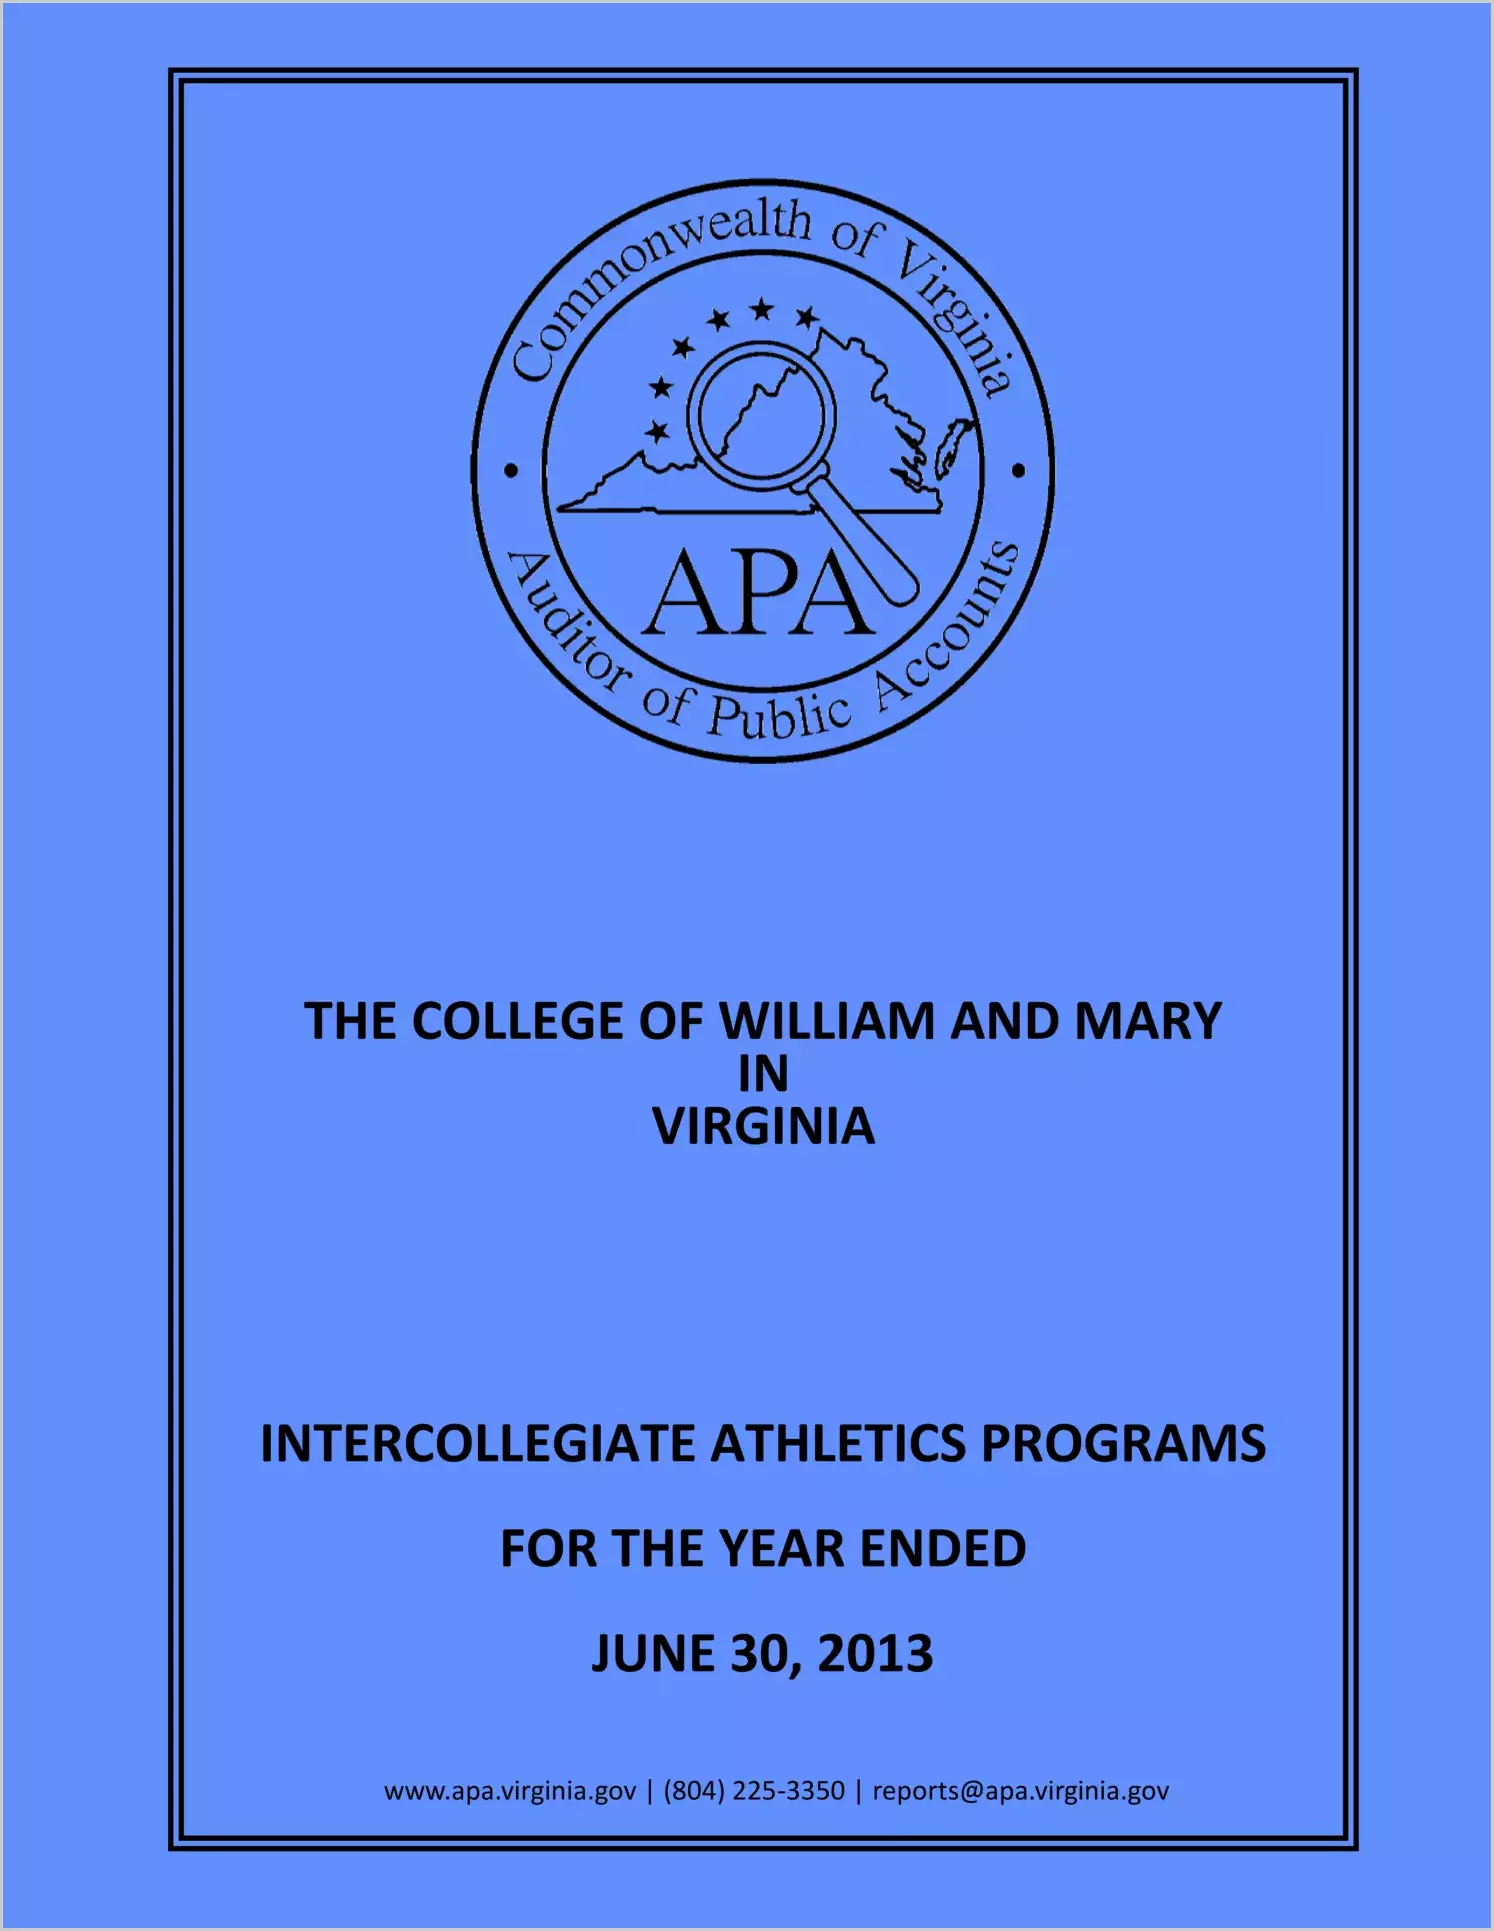 The College of William and Mary in Virginia Intercollegiate Athletics Programs for the year ended June 30, 2013